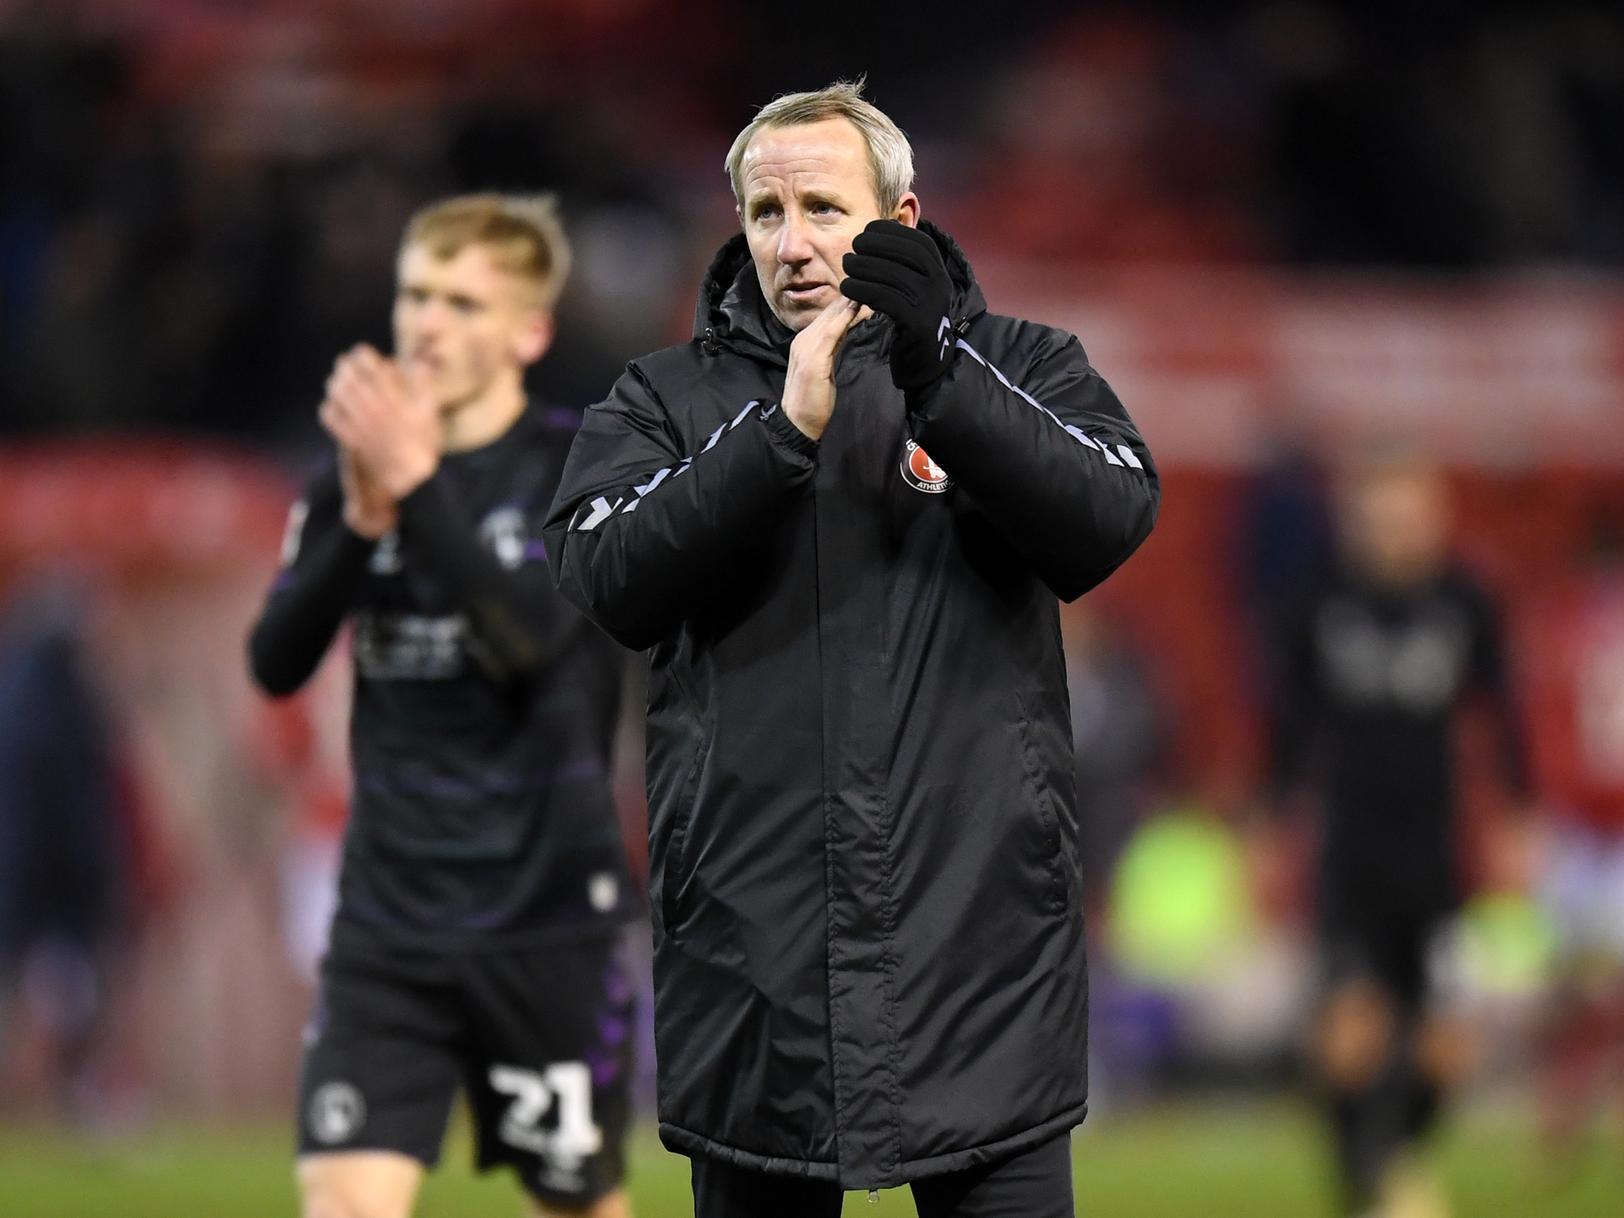 Charlton boss Lee Bowyer has claimed that three more wins could be enough to keep the Addicks up, after their shock win over Nottingham Forest moved them six point clear of the relegation zone. (South London Press)